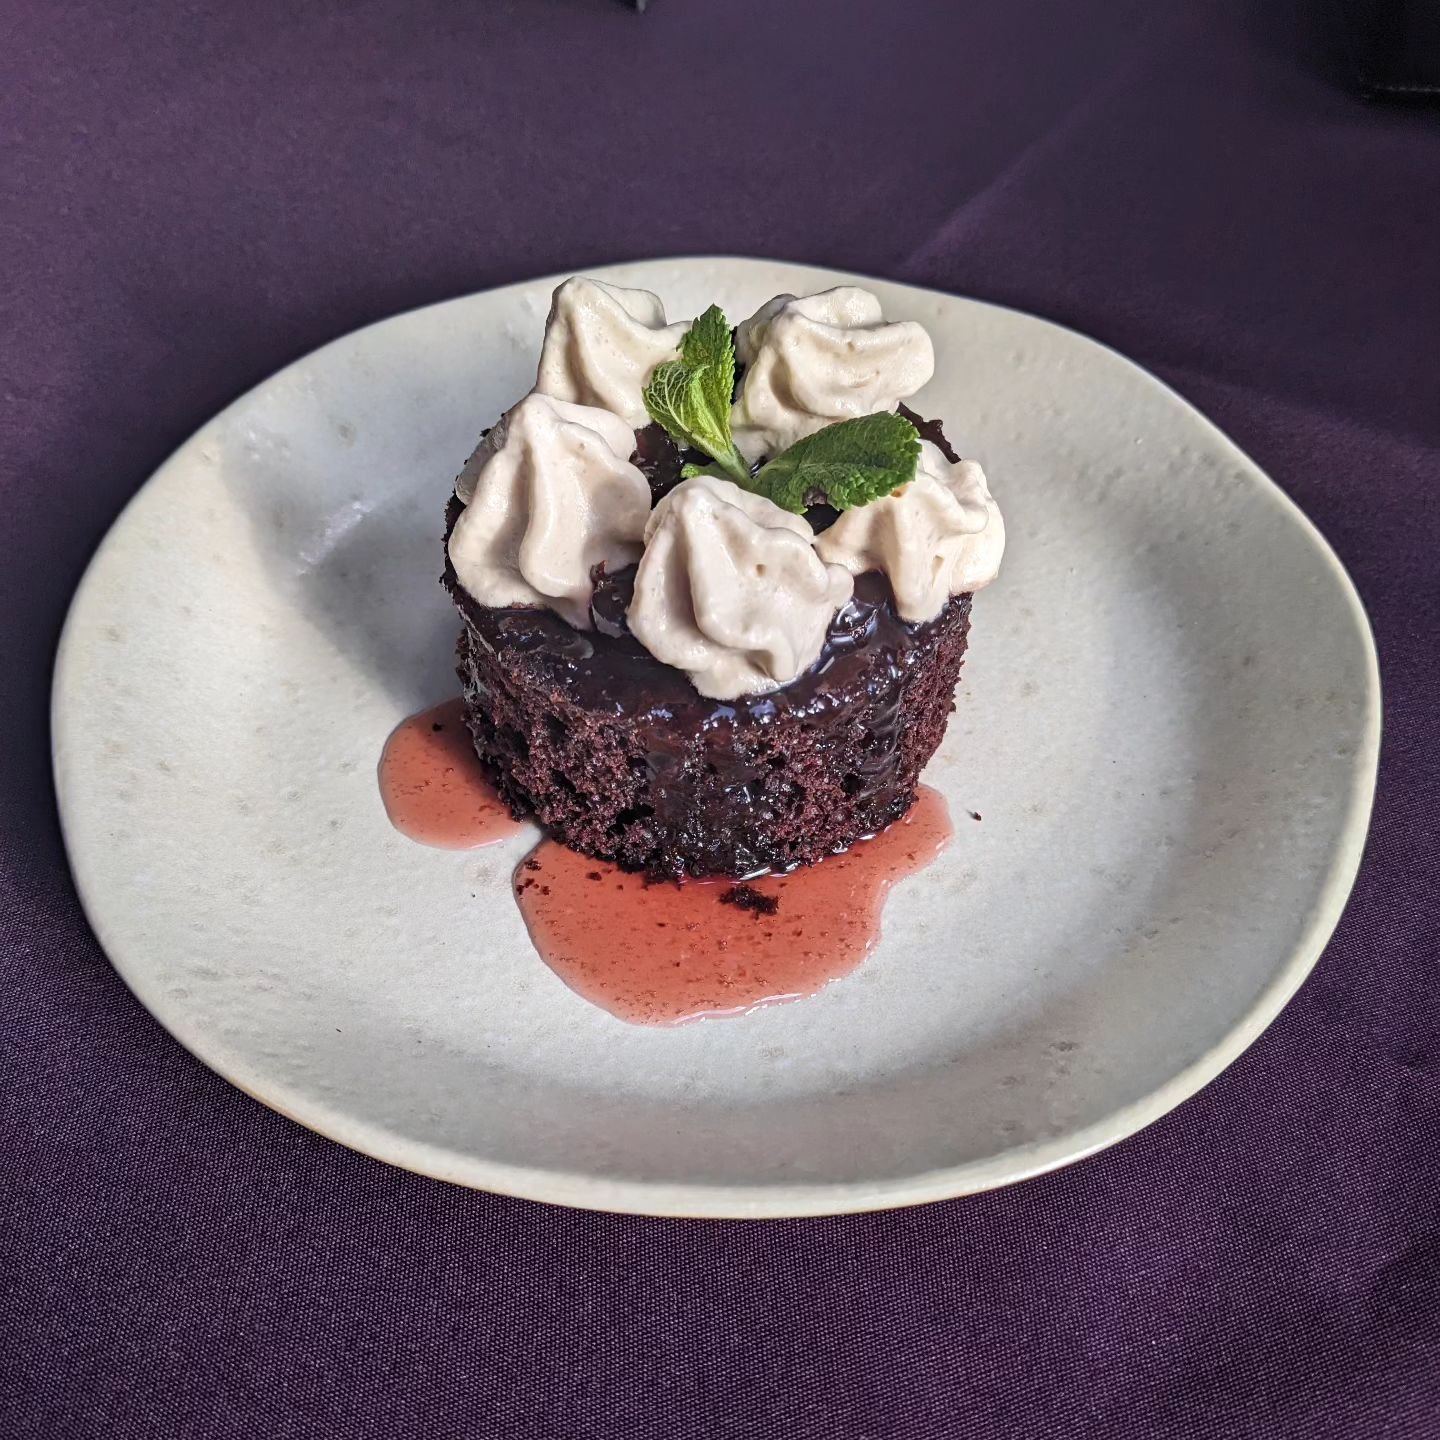 And what else for the free fae, the party animals, the faeries of myth, but decadence. A rich chocolate cake, hot from the oven, bourbon cherry sauce and coffee cream, simple yet indulgent. A lovely way to end a meal, and free kin approved.

What the